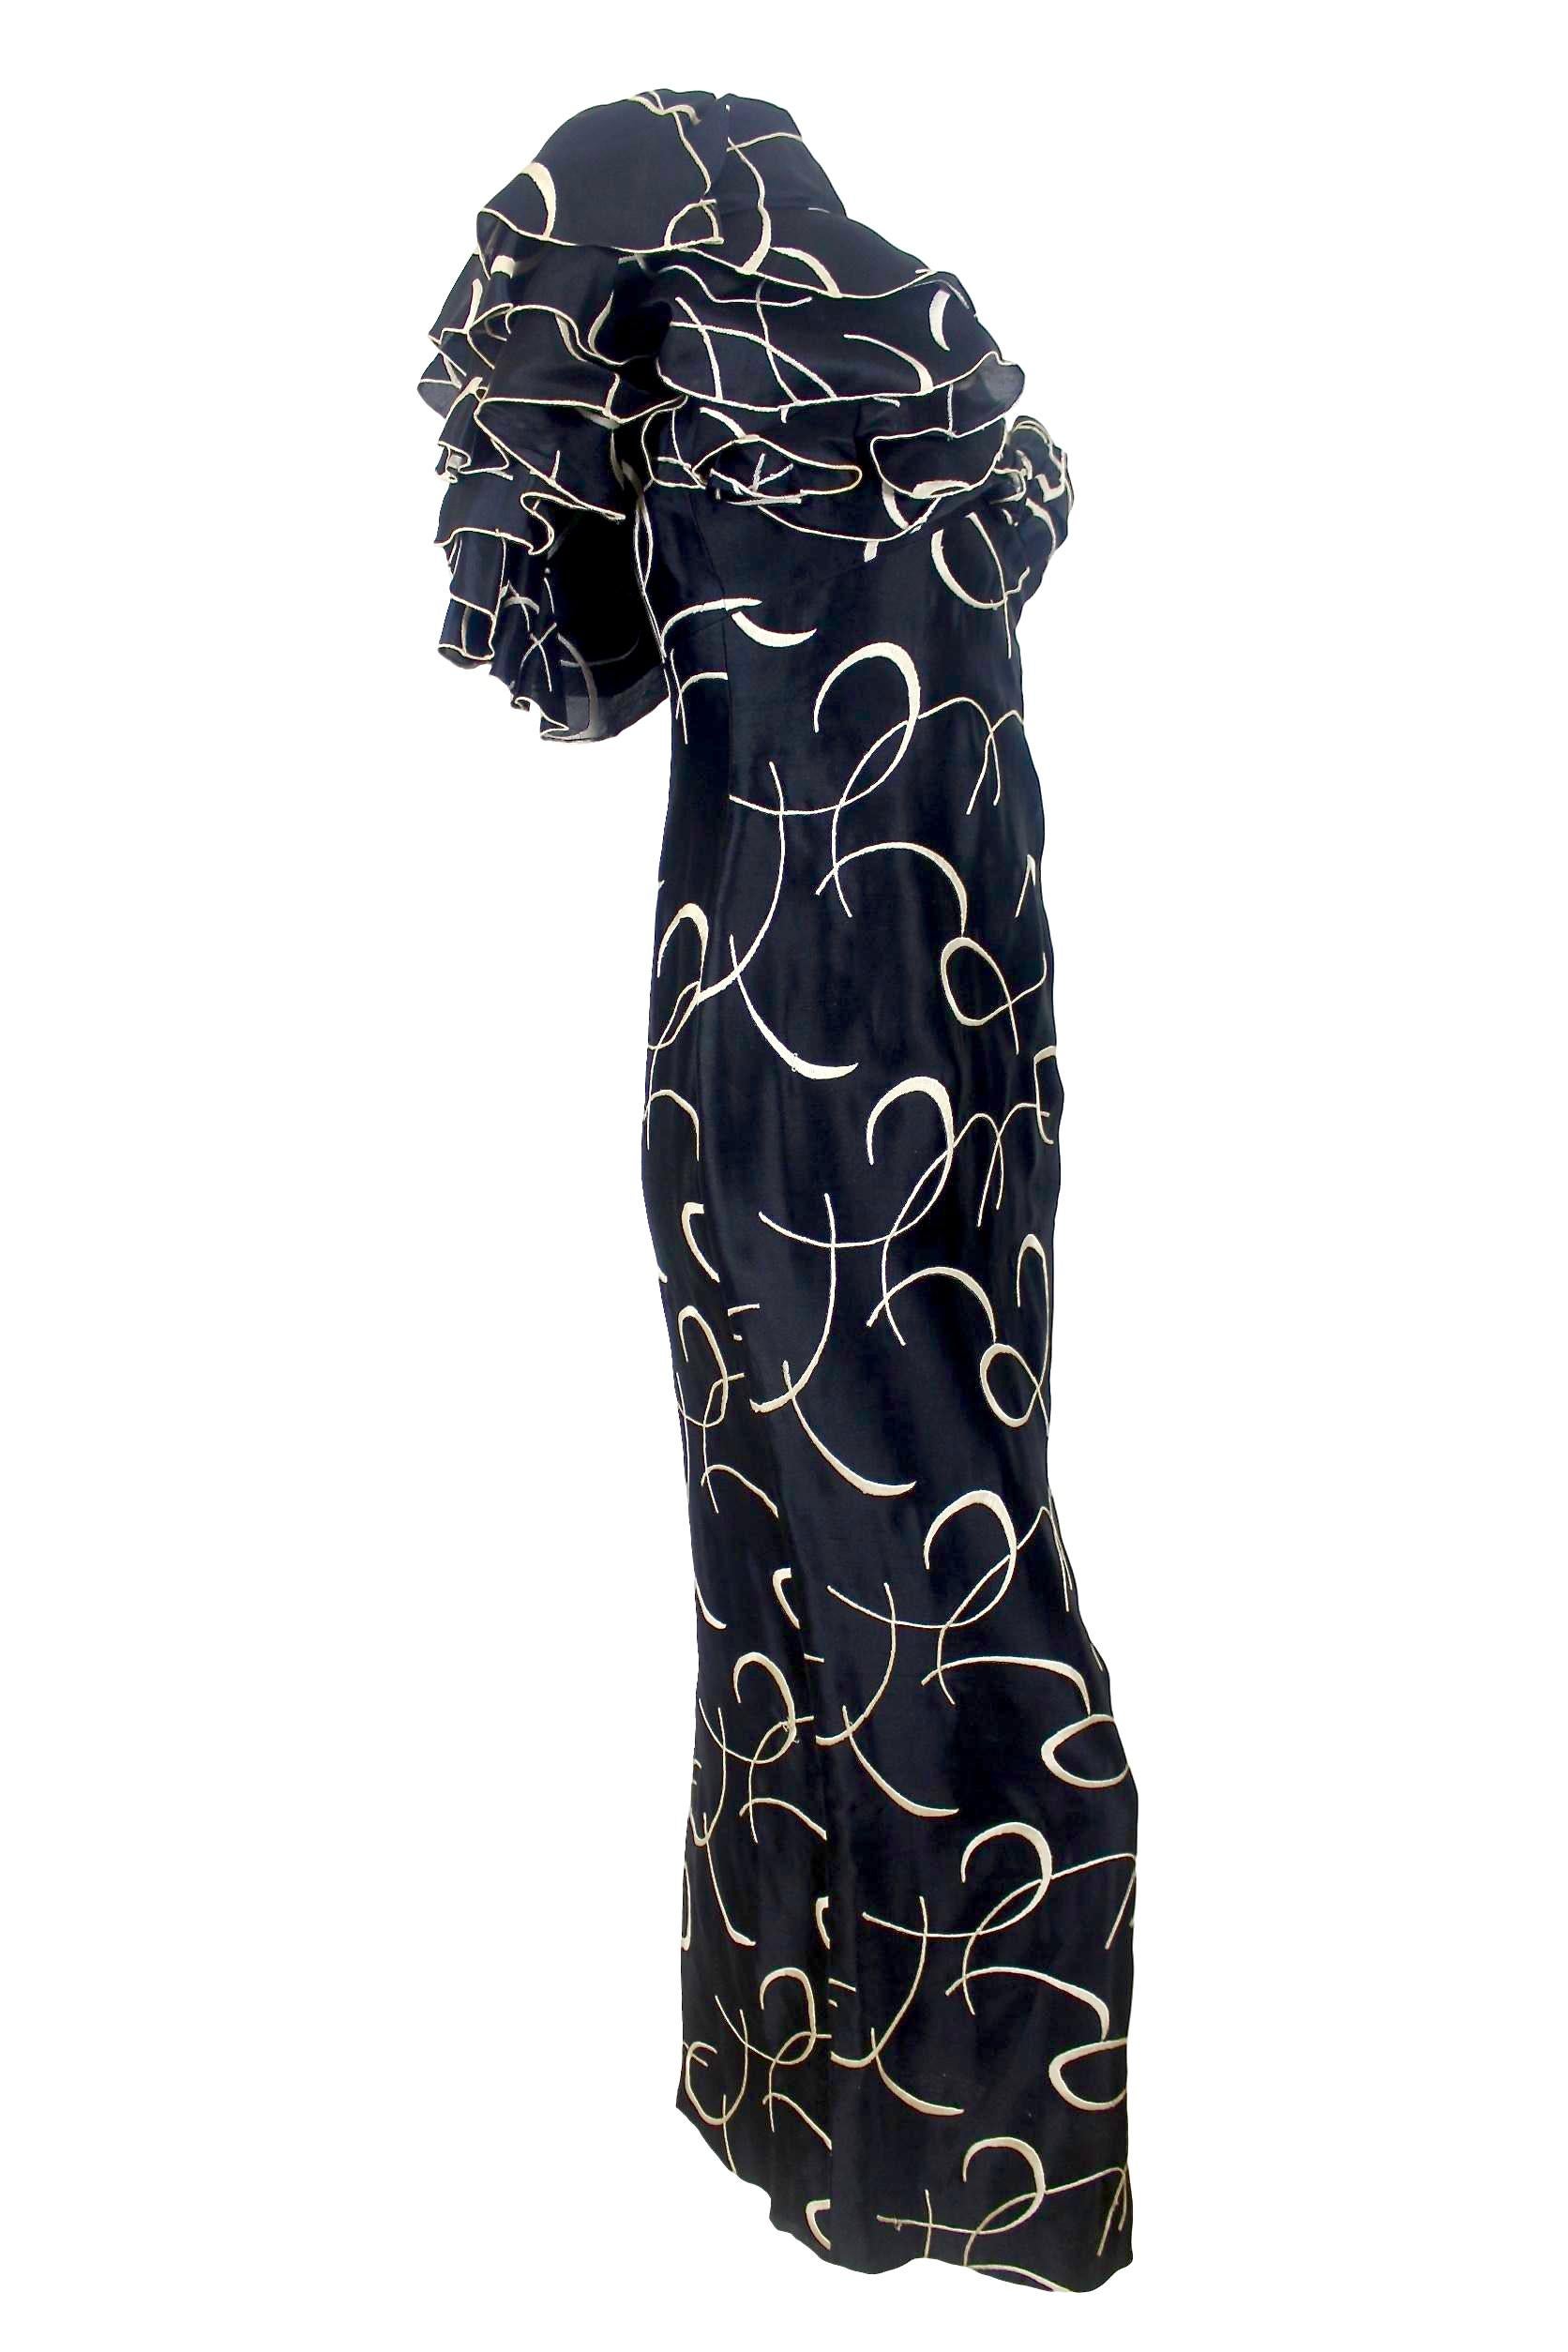 Loris Azzaro Couture Silk Embroidered Evening Dress For Sale 4